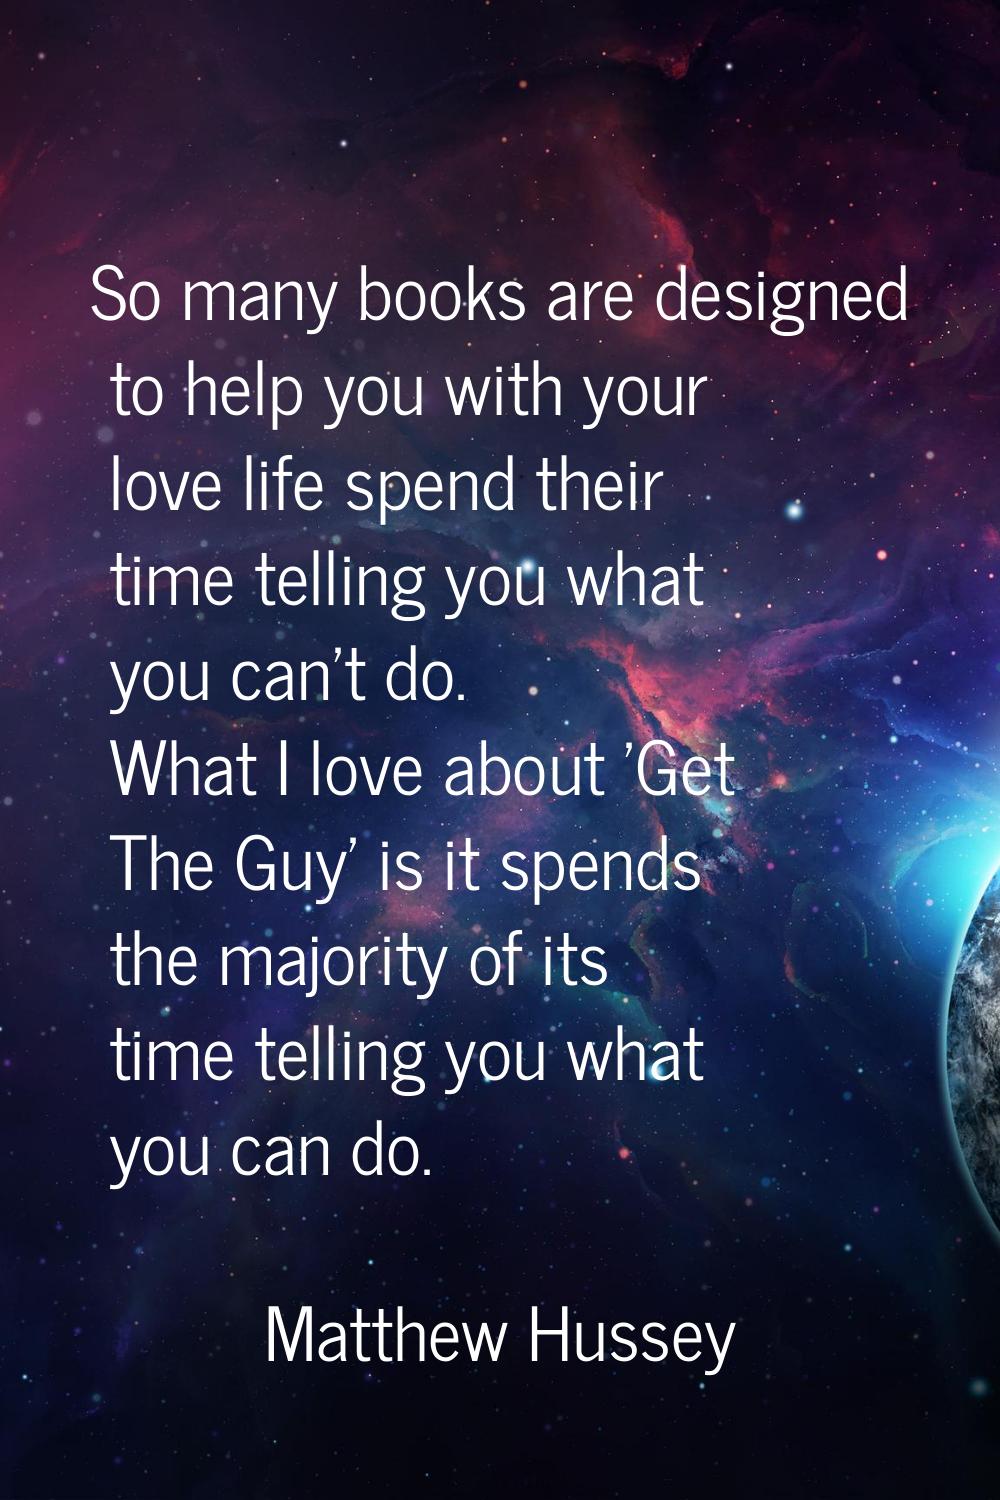 So many books are designed to help you with your love life spend their time telling you what you ca